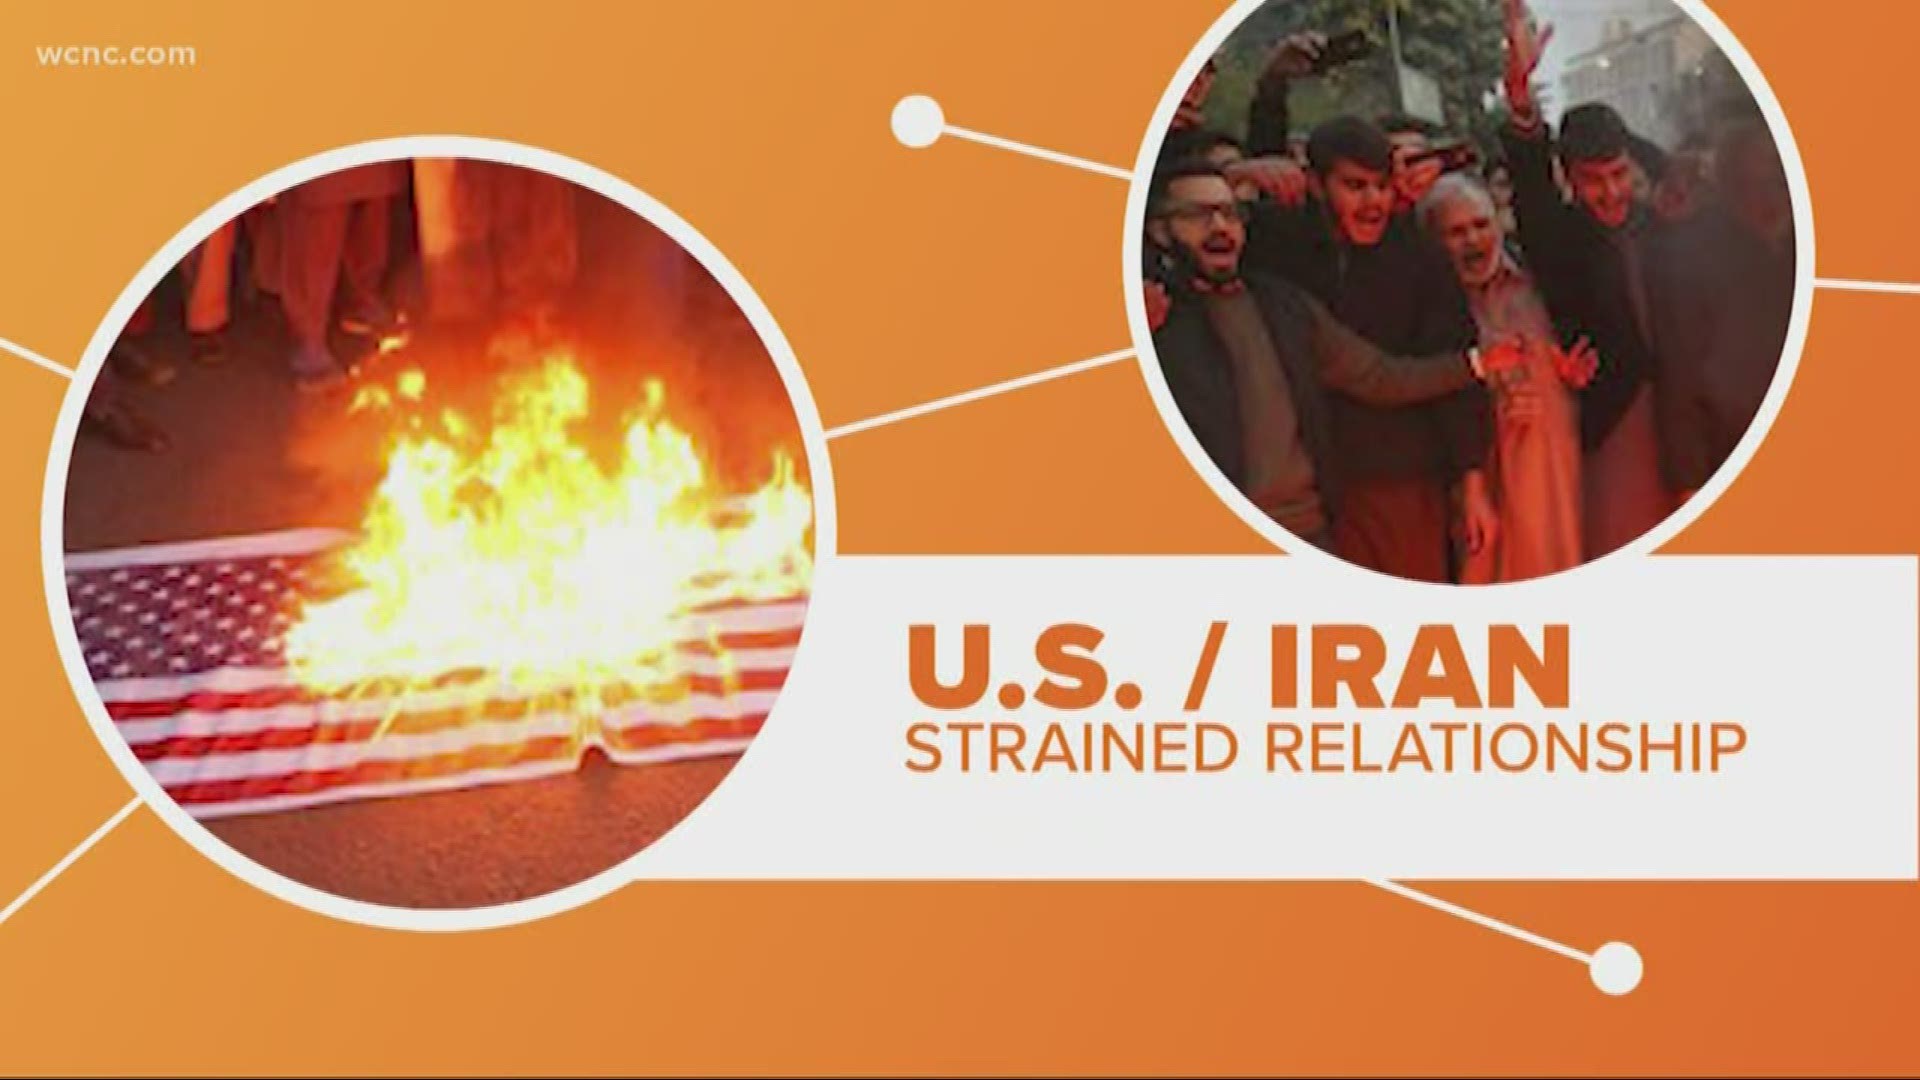 Escalating tensions between the US and Iran. Our bad relationship with the country dates back decades.